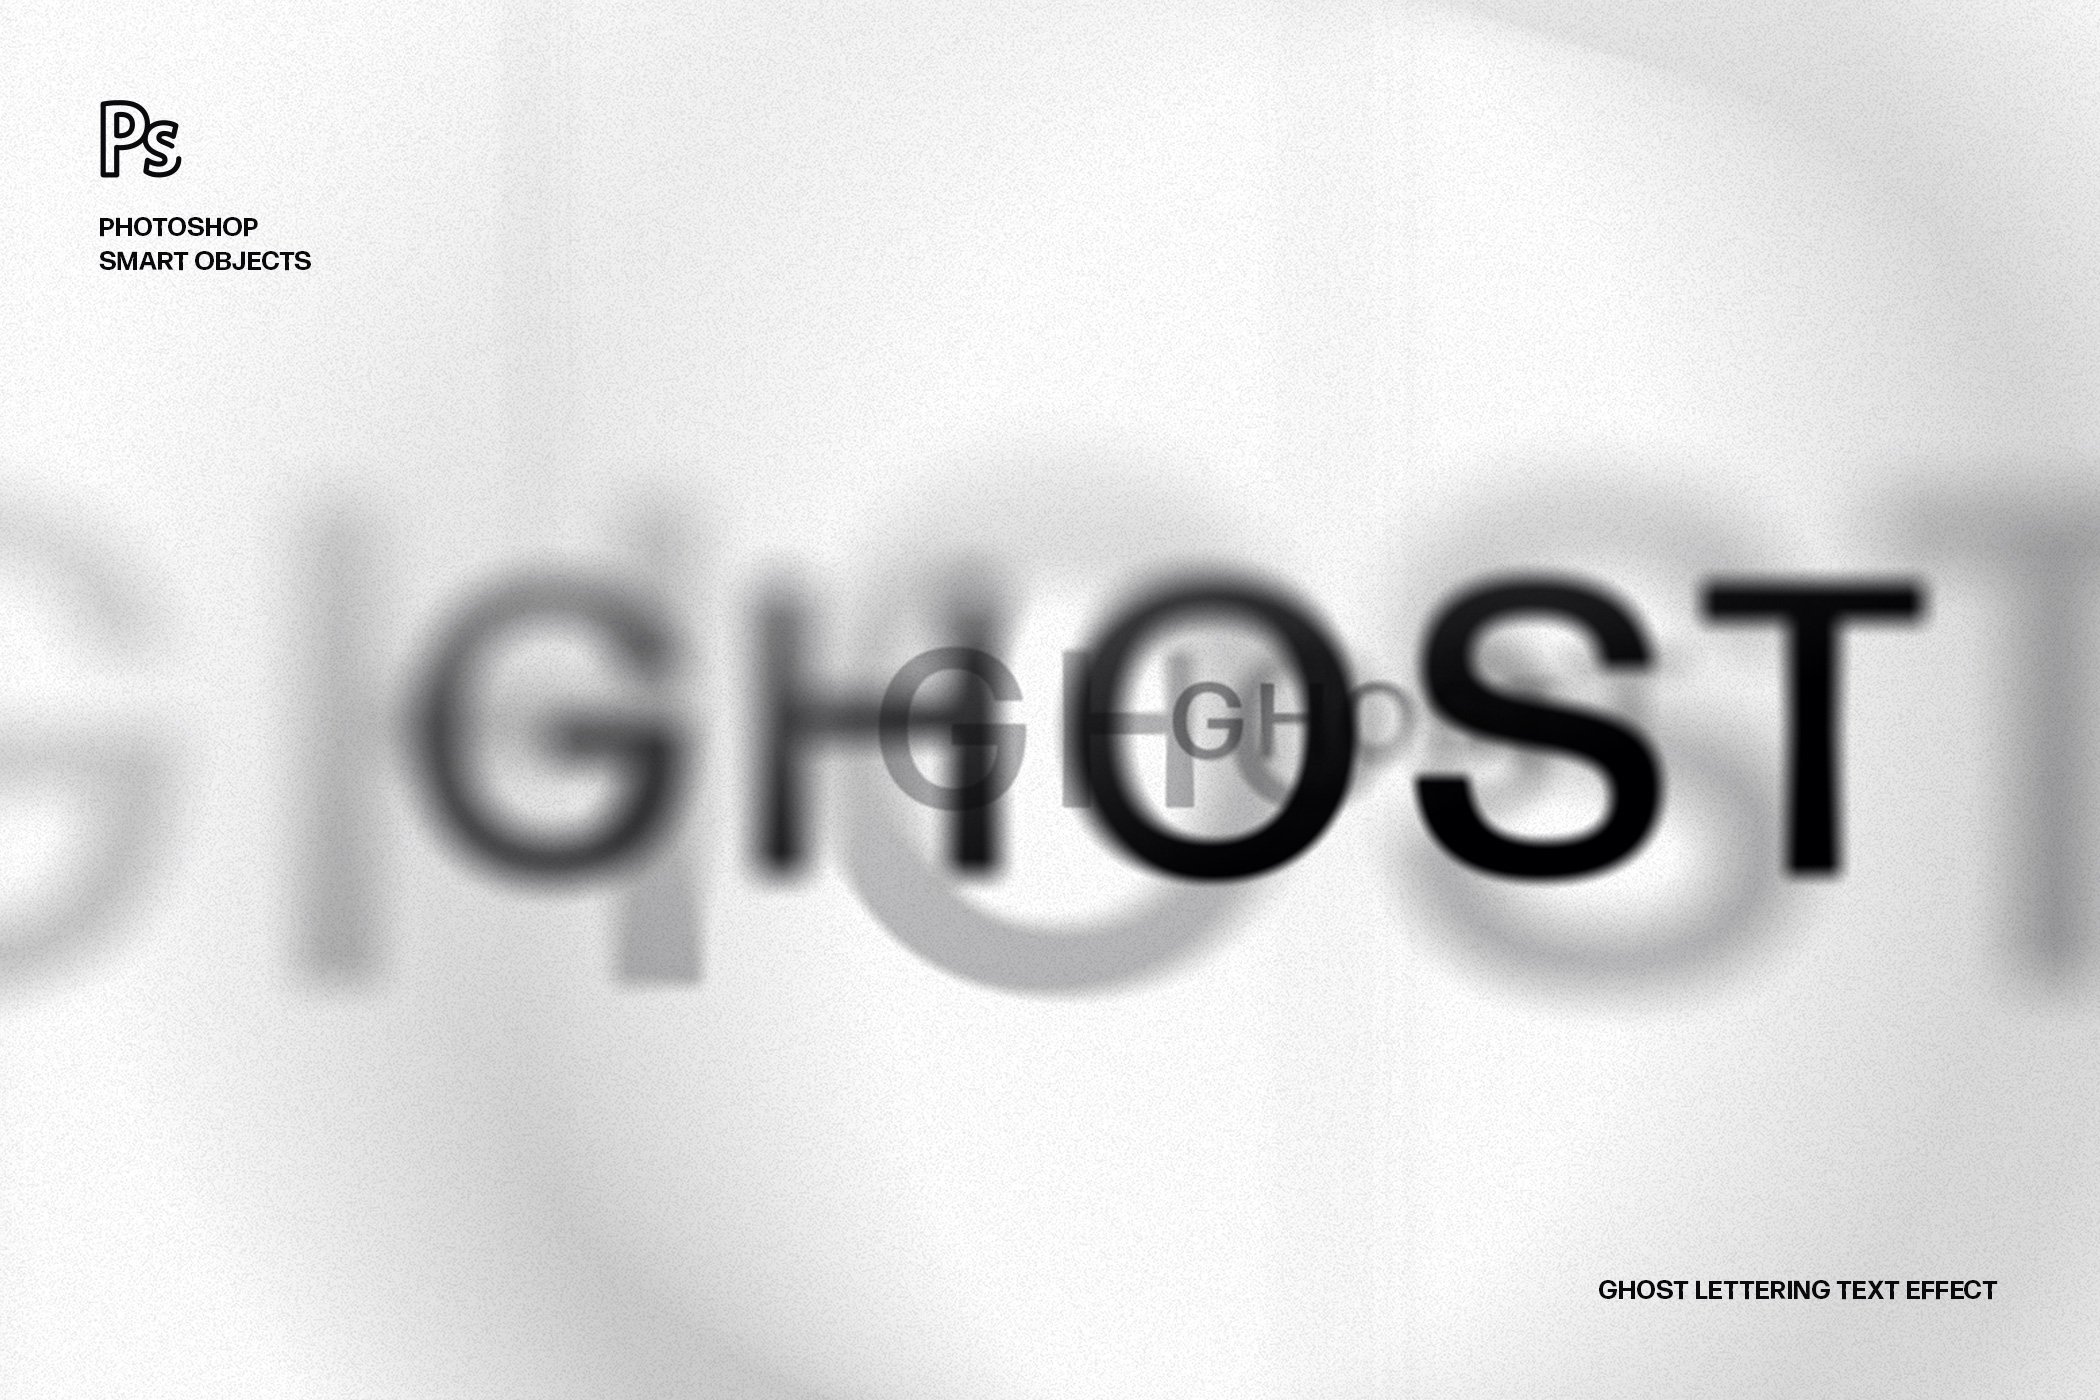 Ghost Lettering Text Effectcover image.